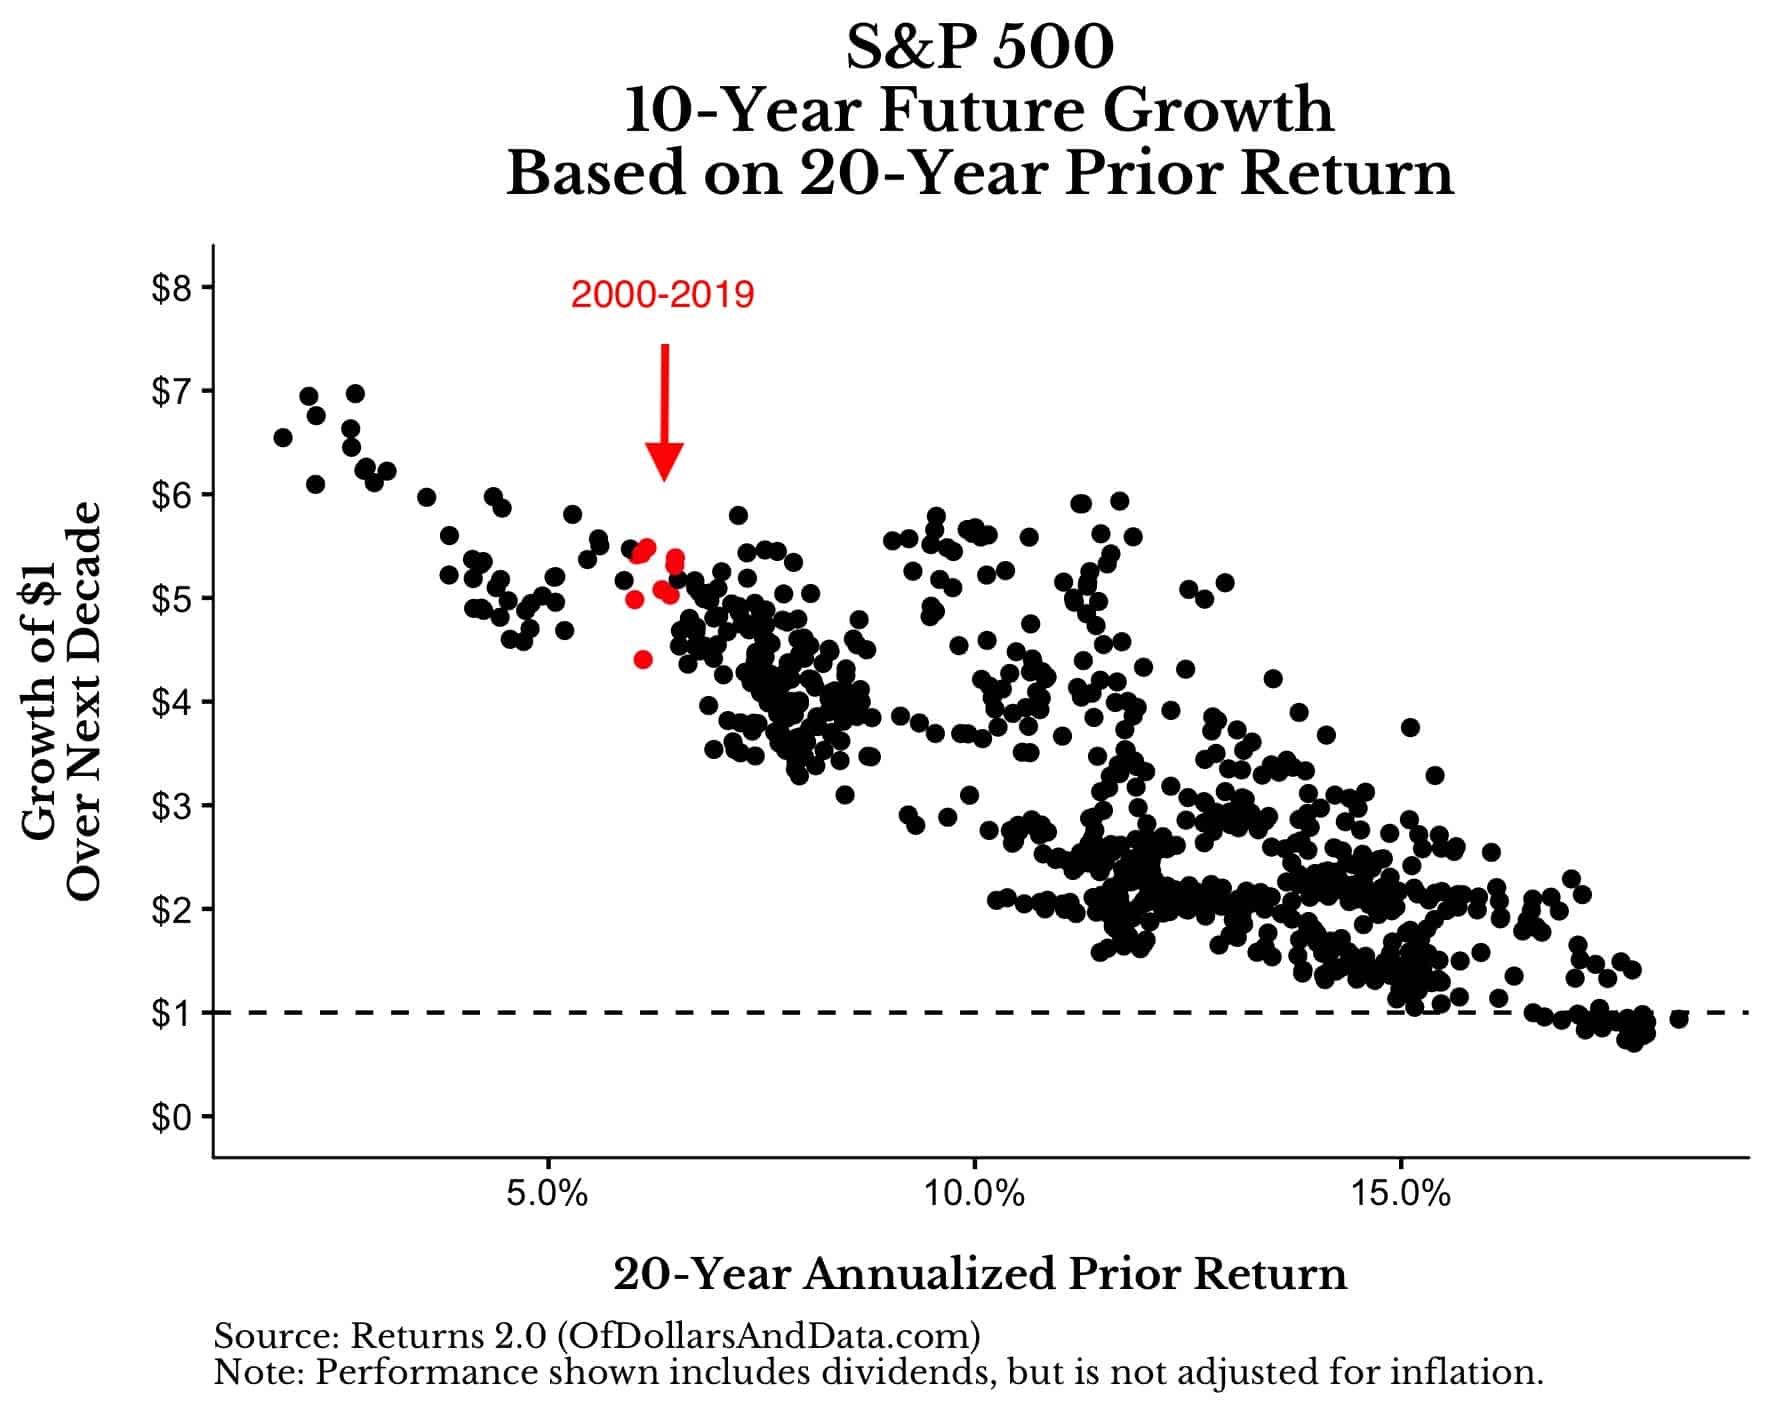 S&P 500 10-year future growth vs 20-year prior growth and where we are today